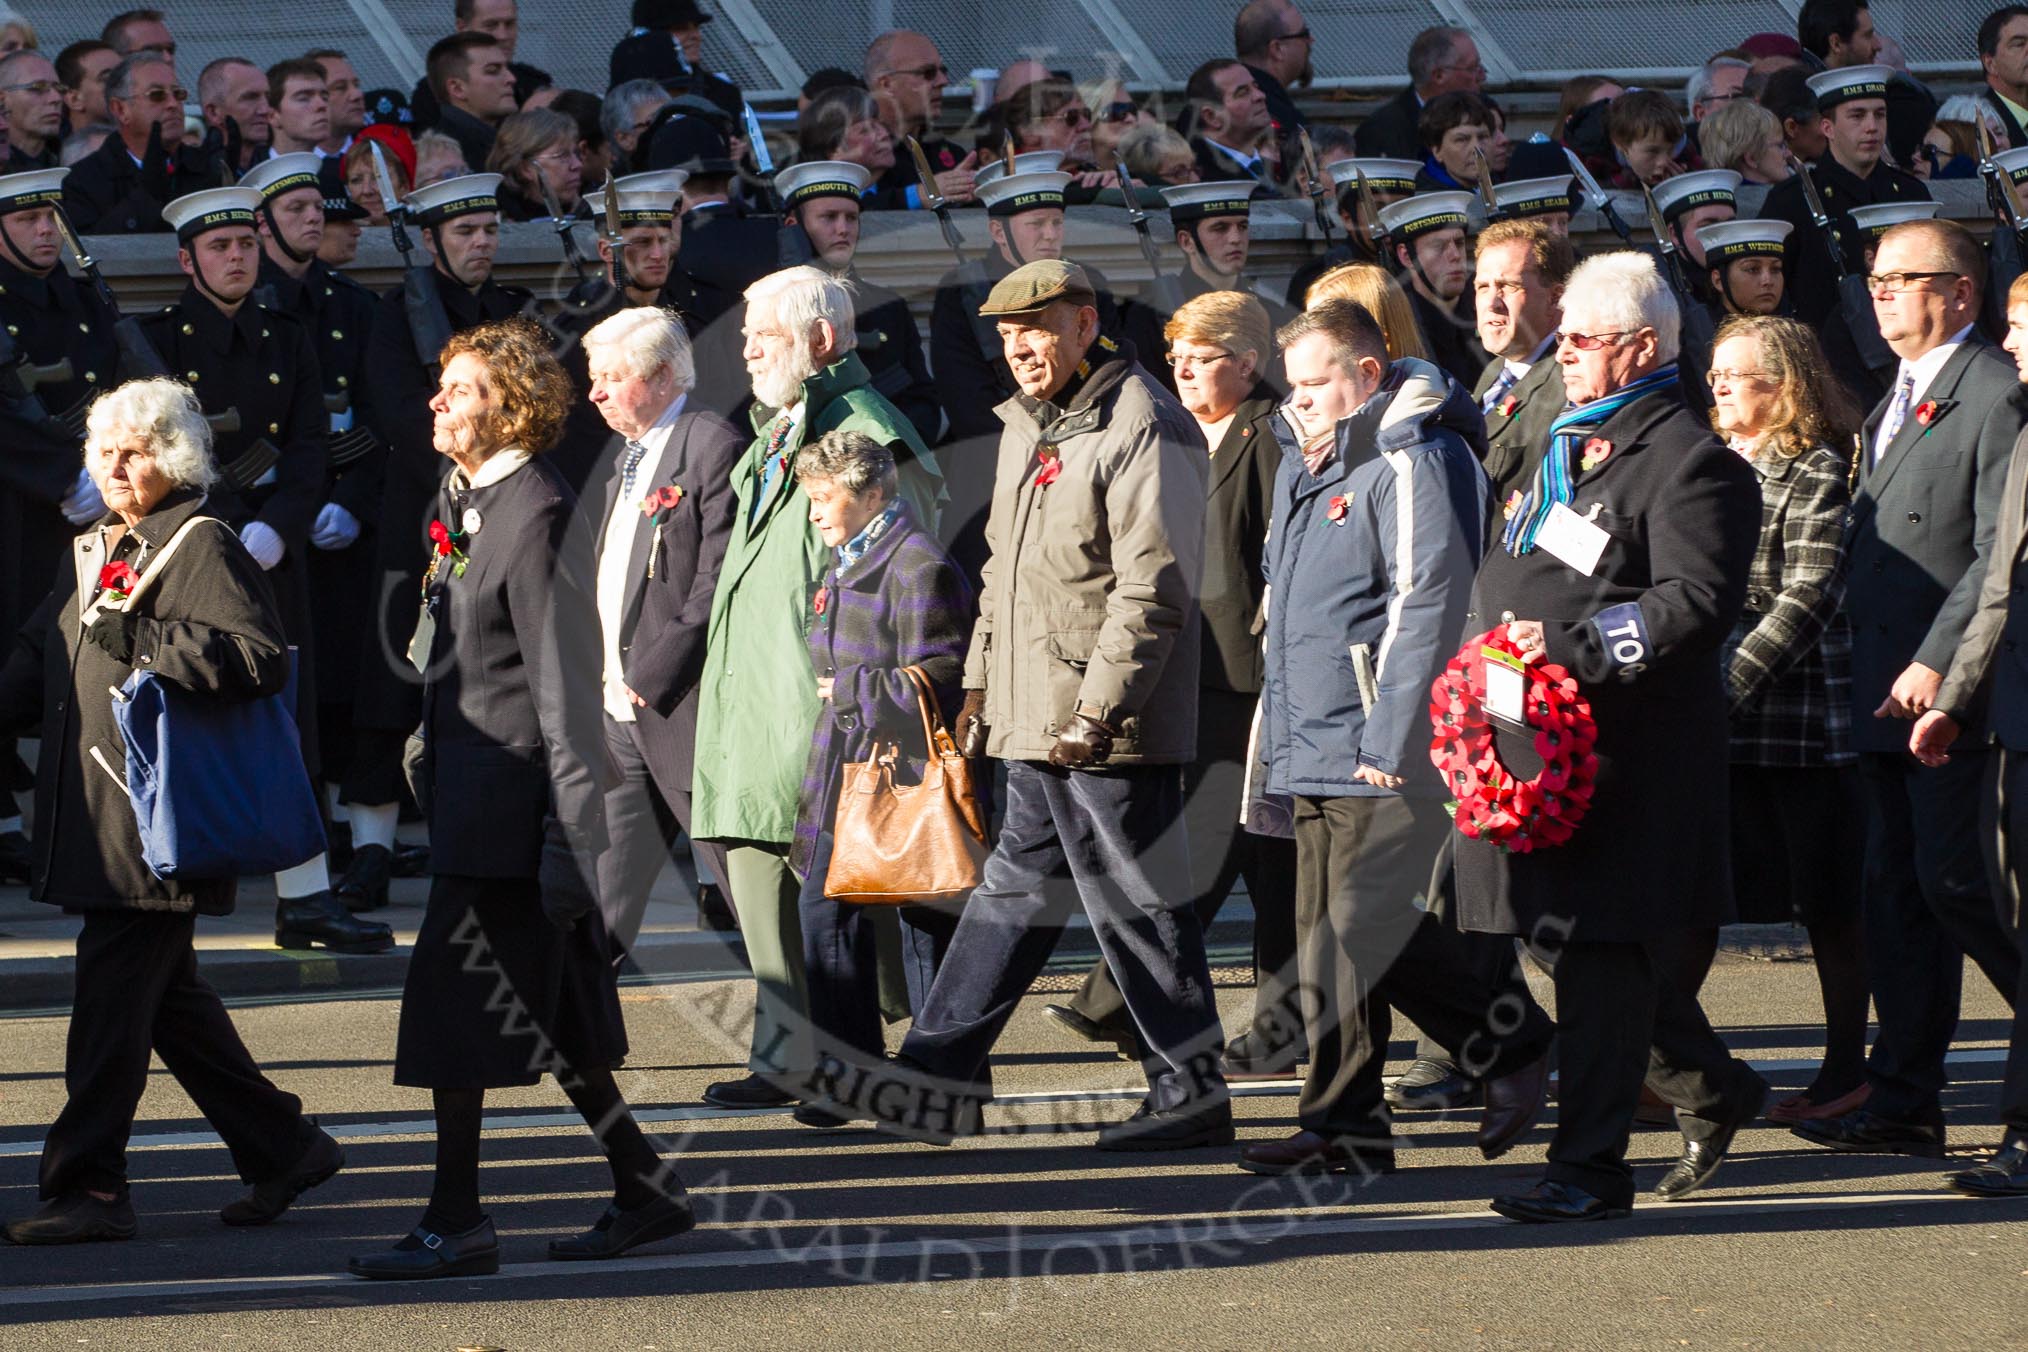 Remembrance Sunday 2012 Cenotaph March Past: Group M6 - Evacuees Reunion Association and M7 - TOC H..
Whitehall, Cenotaph,
London SW1,

United Kingdom,
on 11 November 2012 at 12:10, image #1480